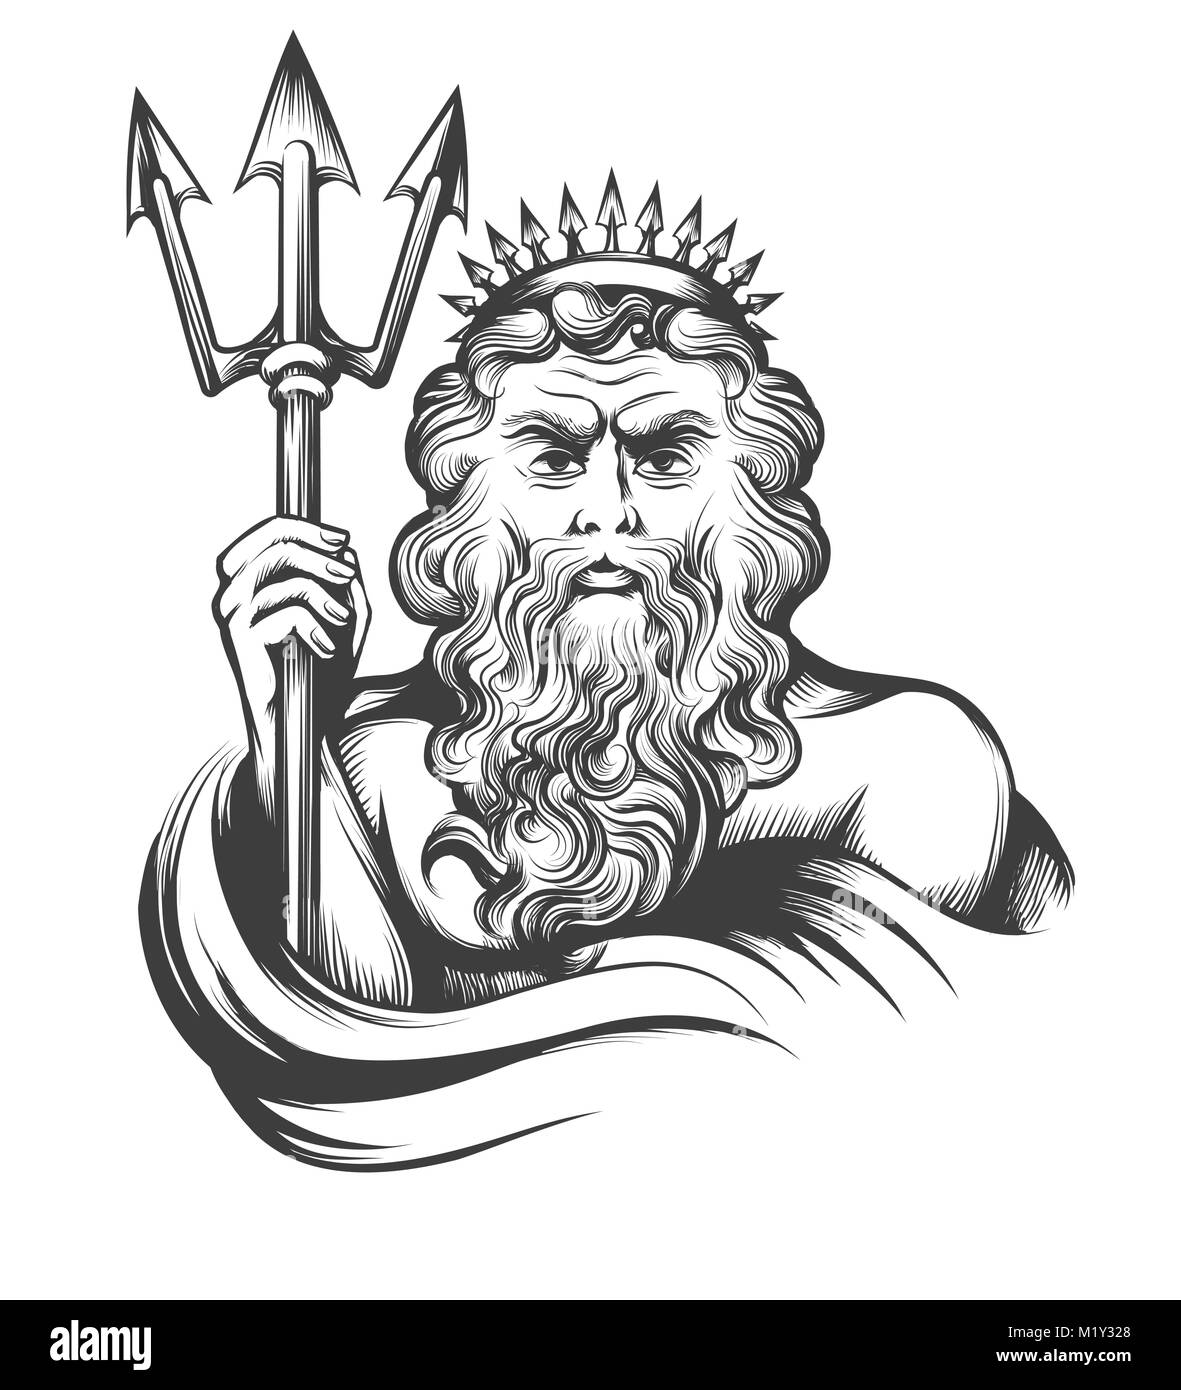 Neptune holds Trident drawn in engraving style isolated on white background. Vector illustration. Stock Vector